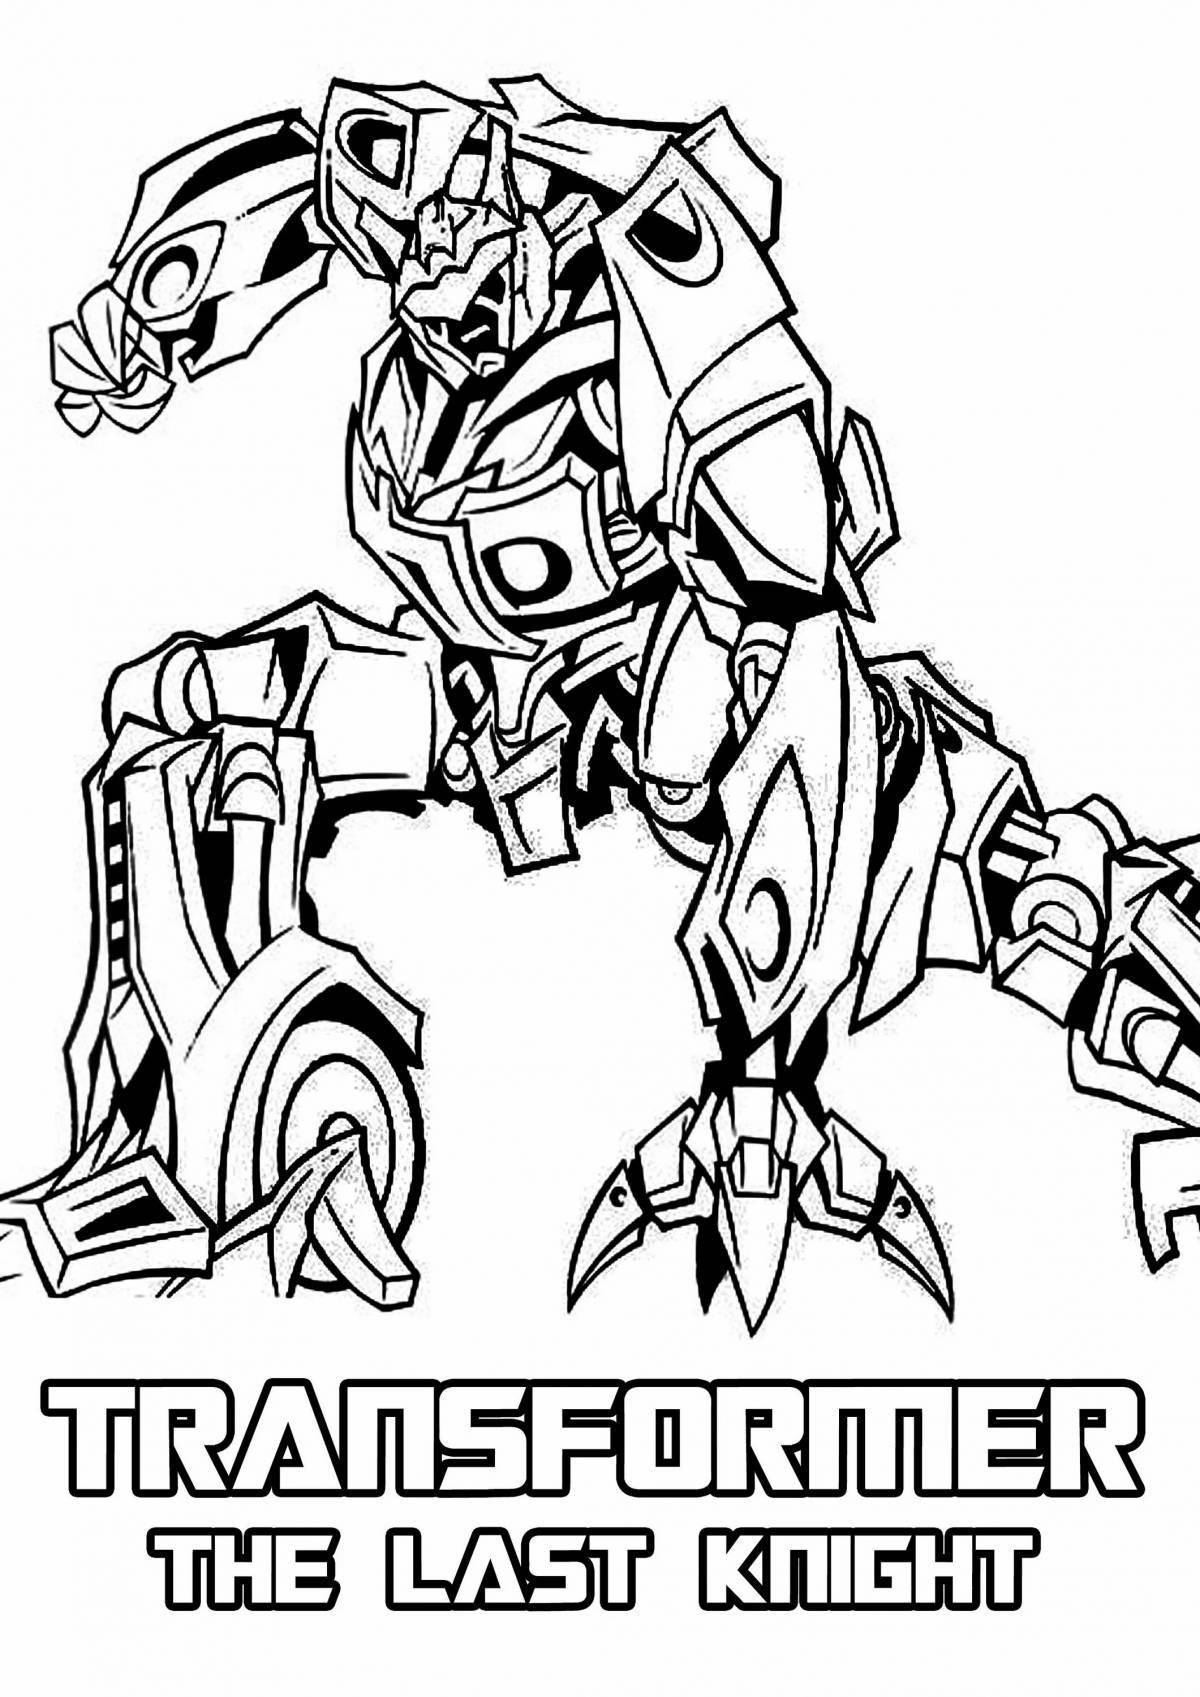 Intricate ironhide transformer coloring page